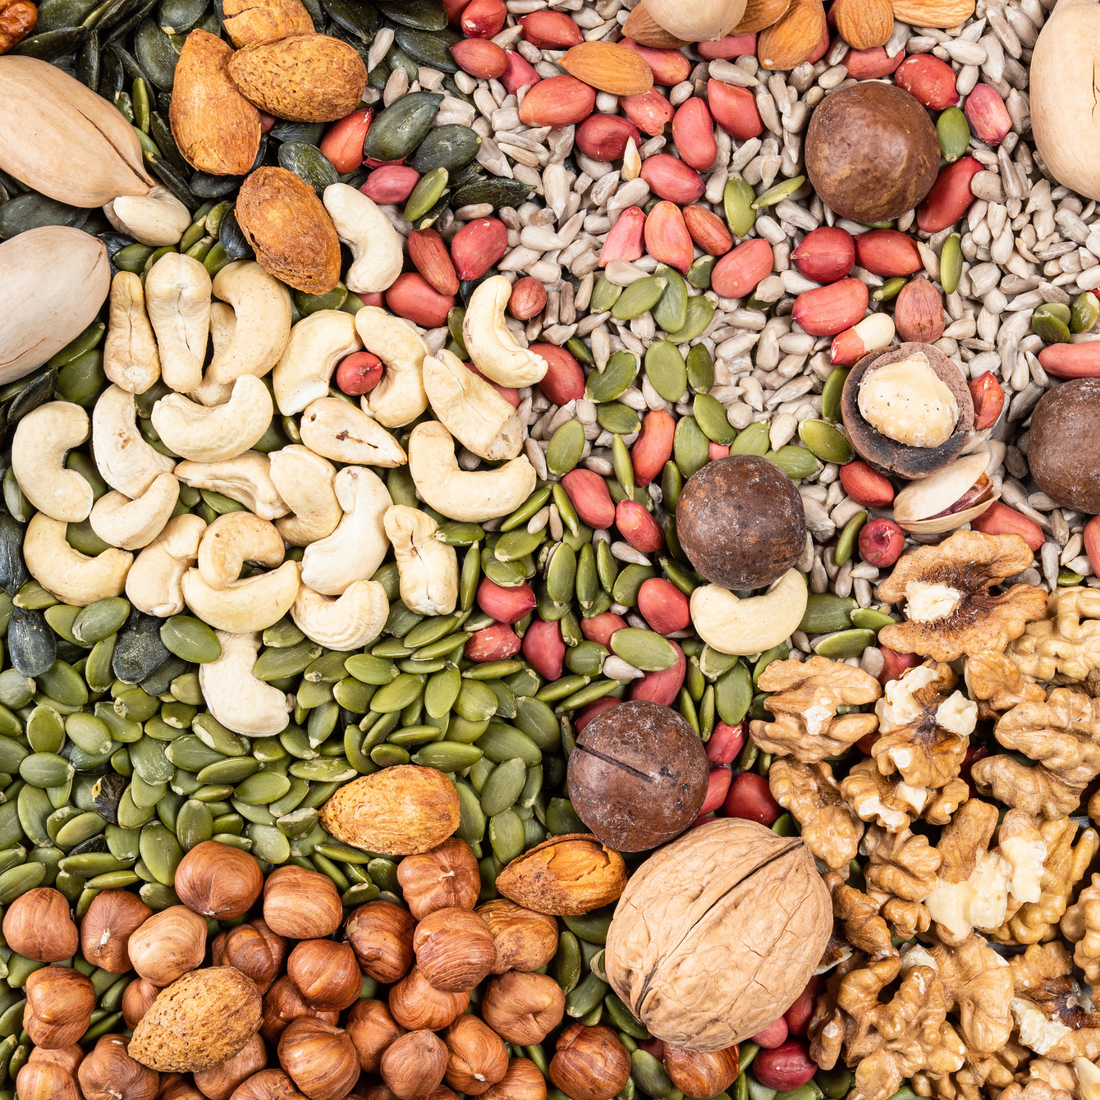 Choosing the Right Mix: A Guide to Trail Mix Varieties